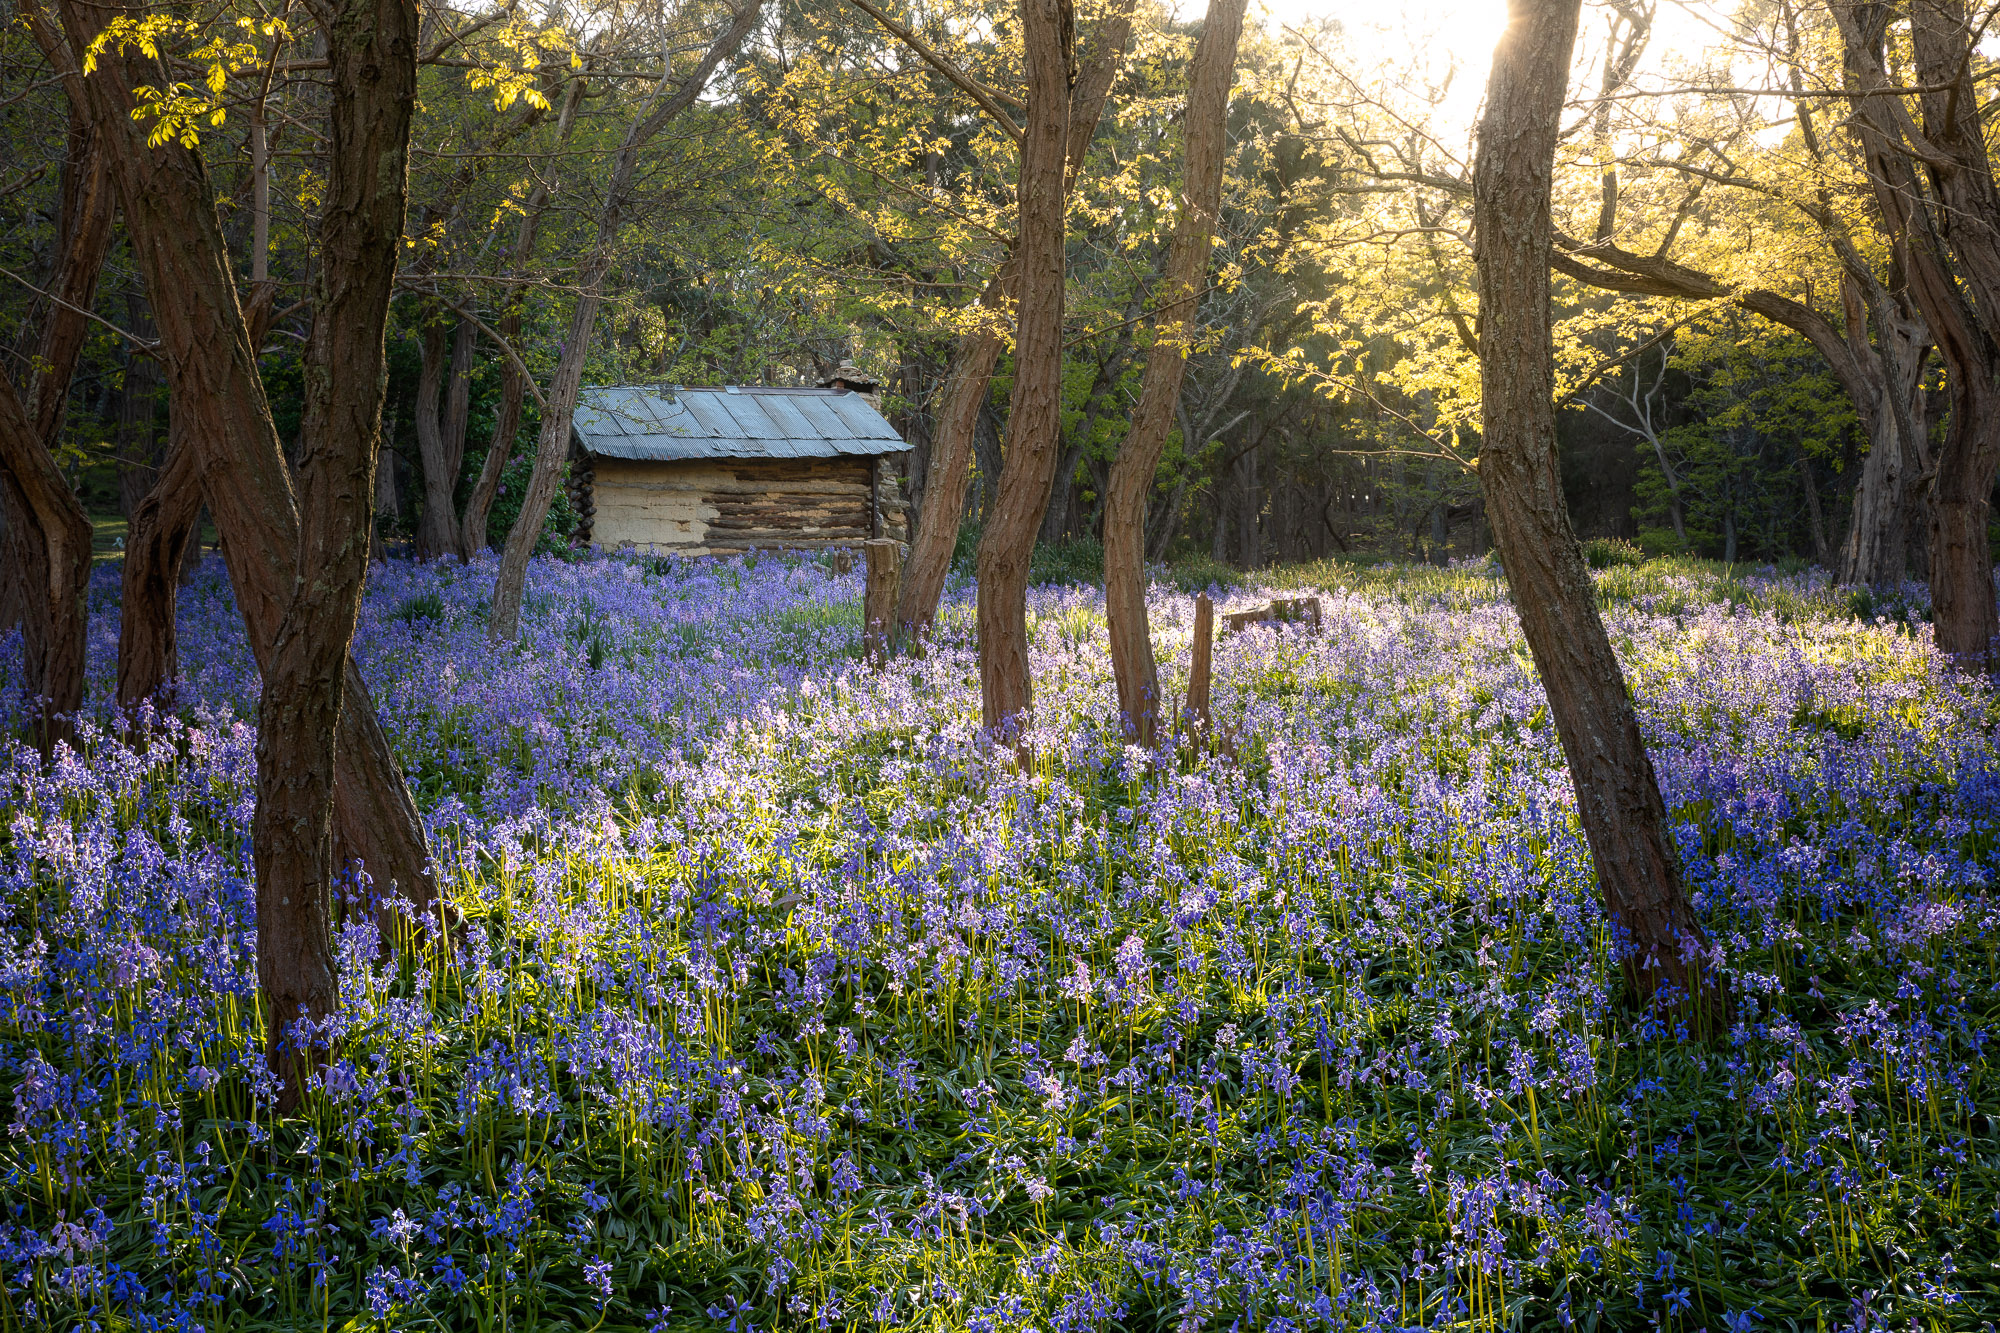 Photo of an old hut in the bush surrounded by flowering bluebells.